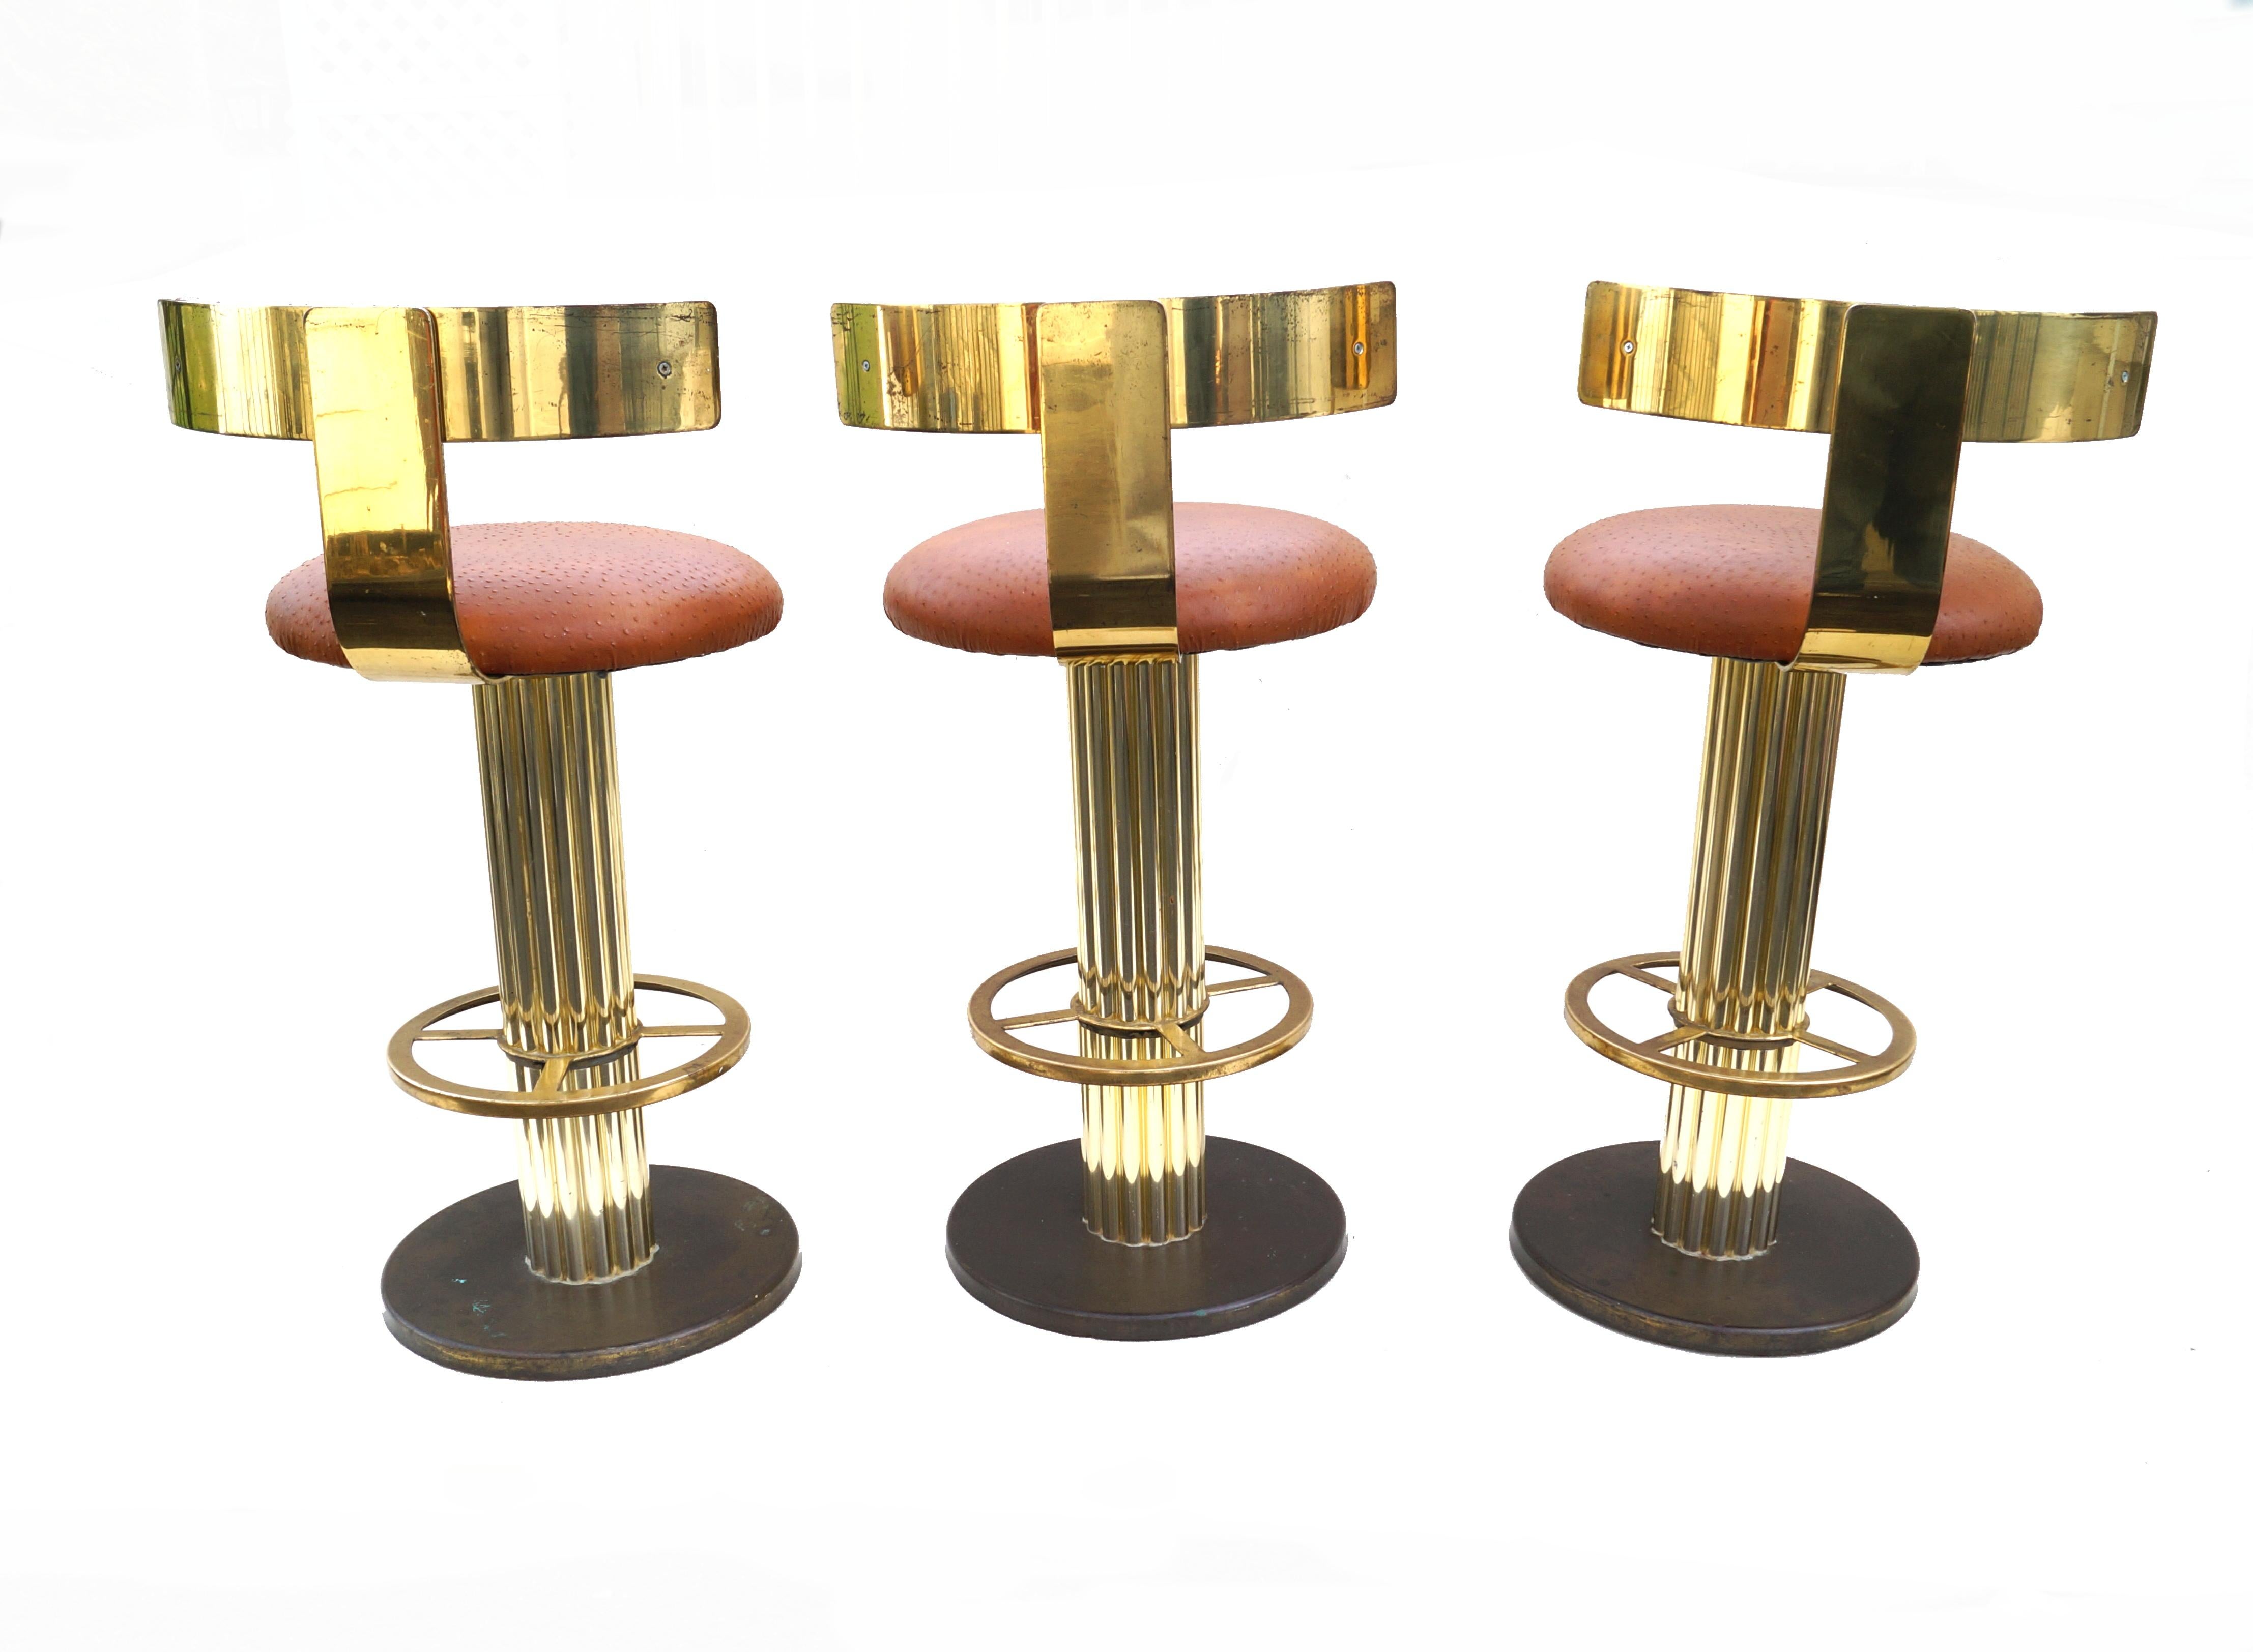 Late 20th Century Modern Design For Leisure Ostrich Brass Bar Stools Set of 3 Barstool For Sale